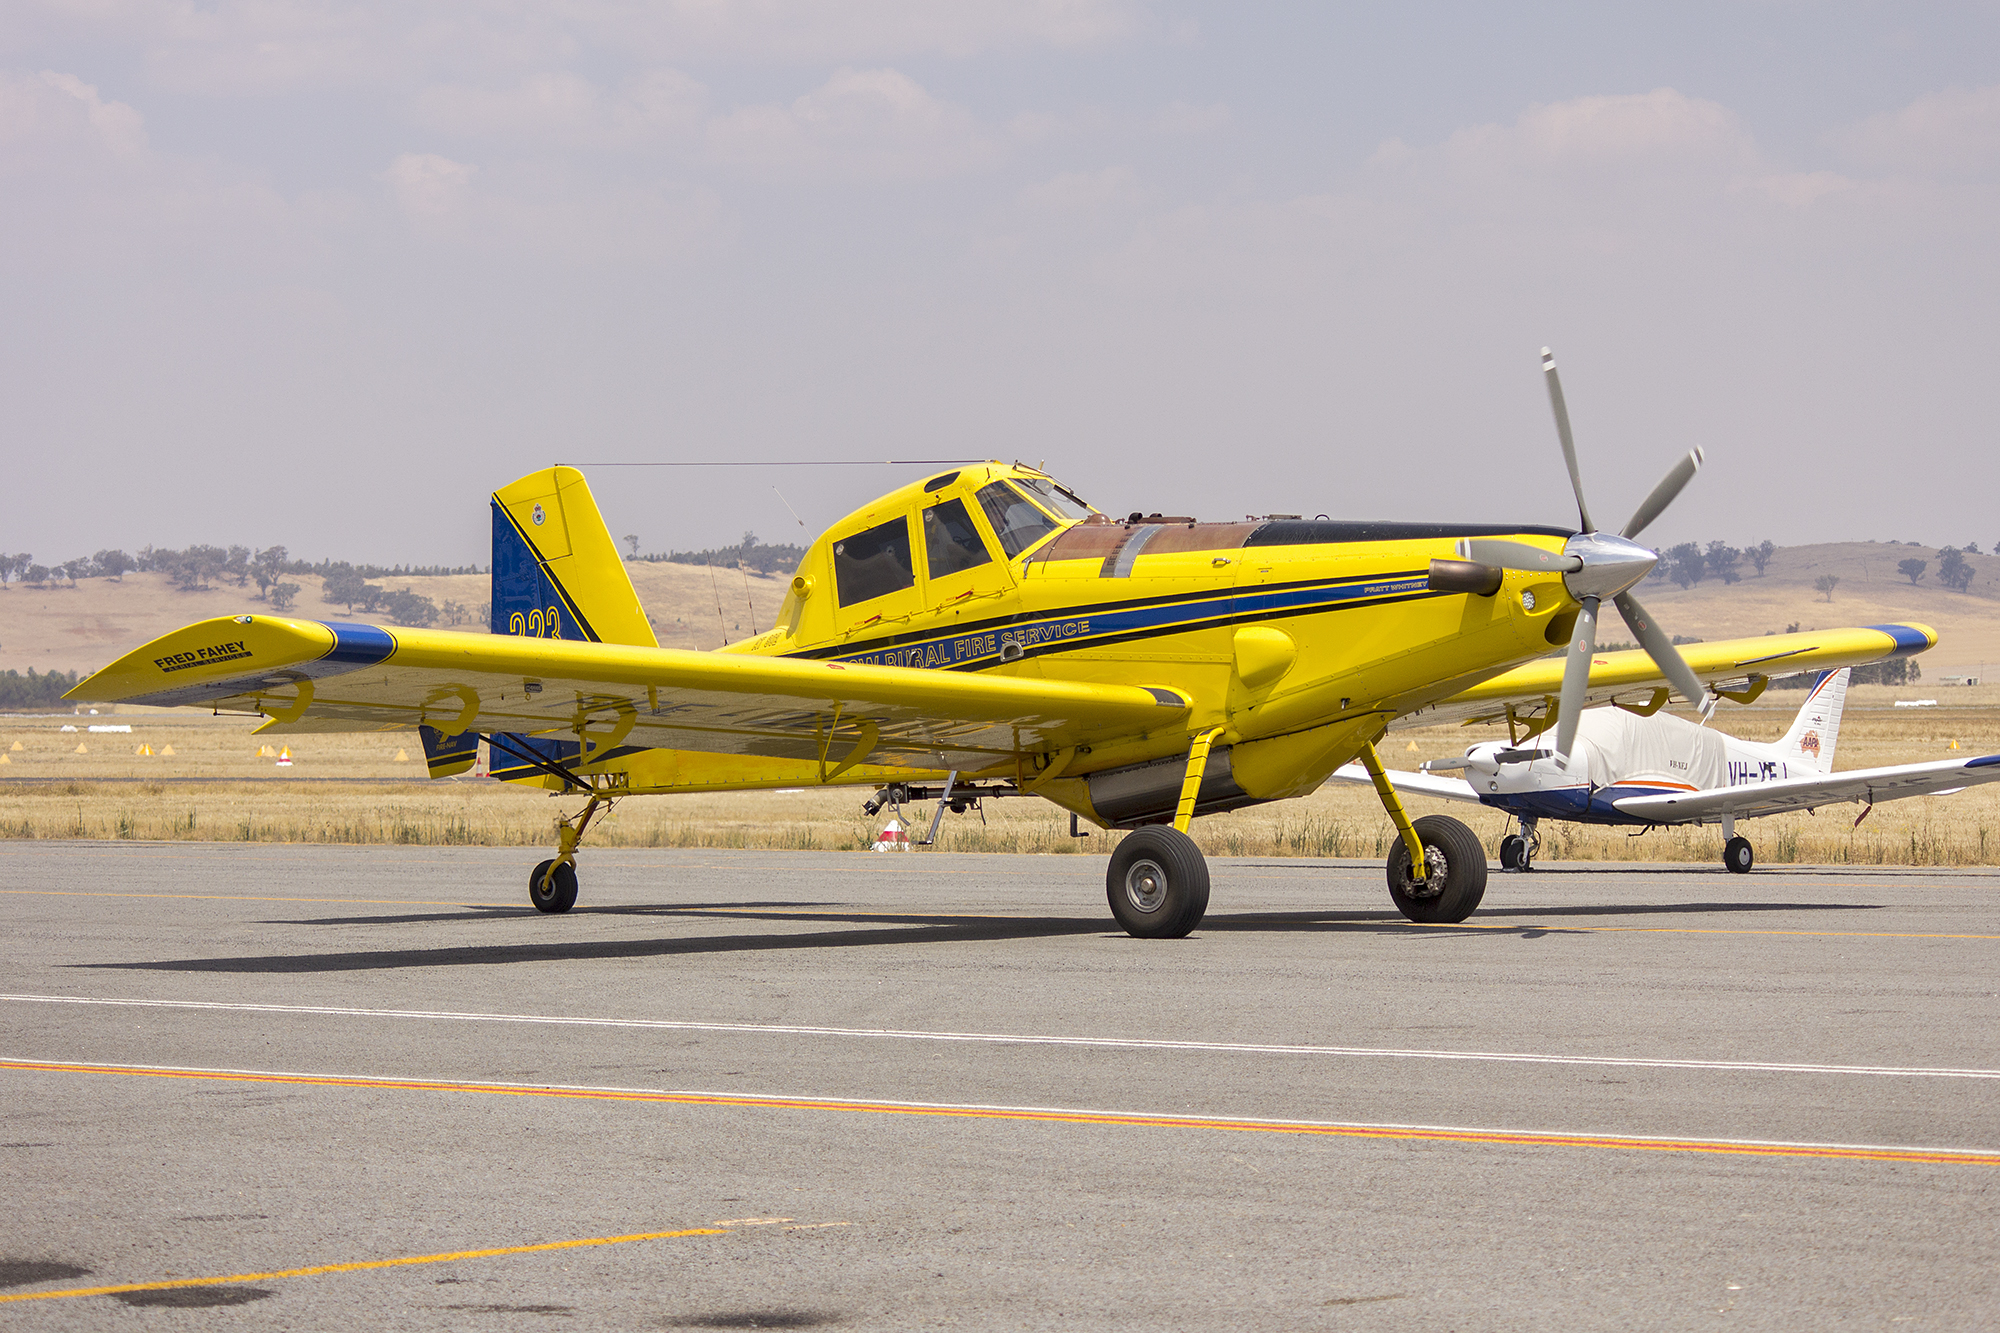 Fred Fahey Aerial Services (VH-CVF) Air Tractor AT-802 waiting to refill with fire retardant at Wagga Wagga Airport